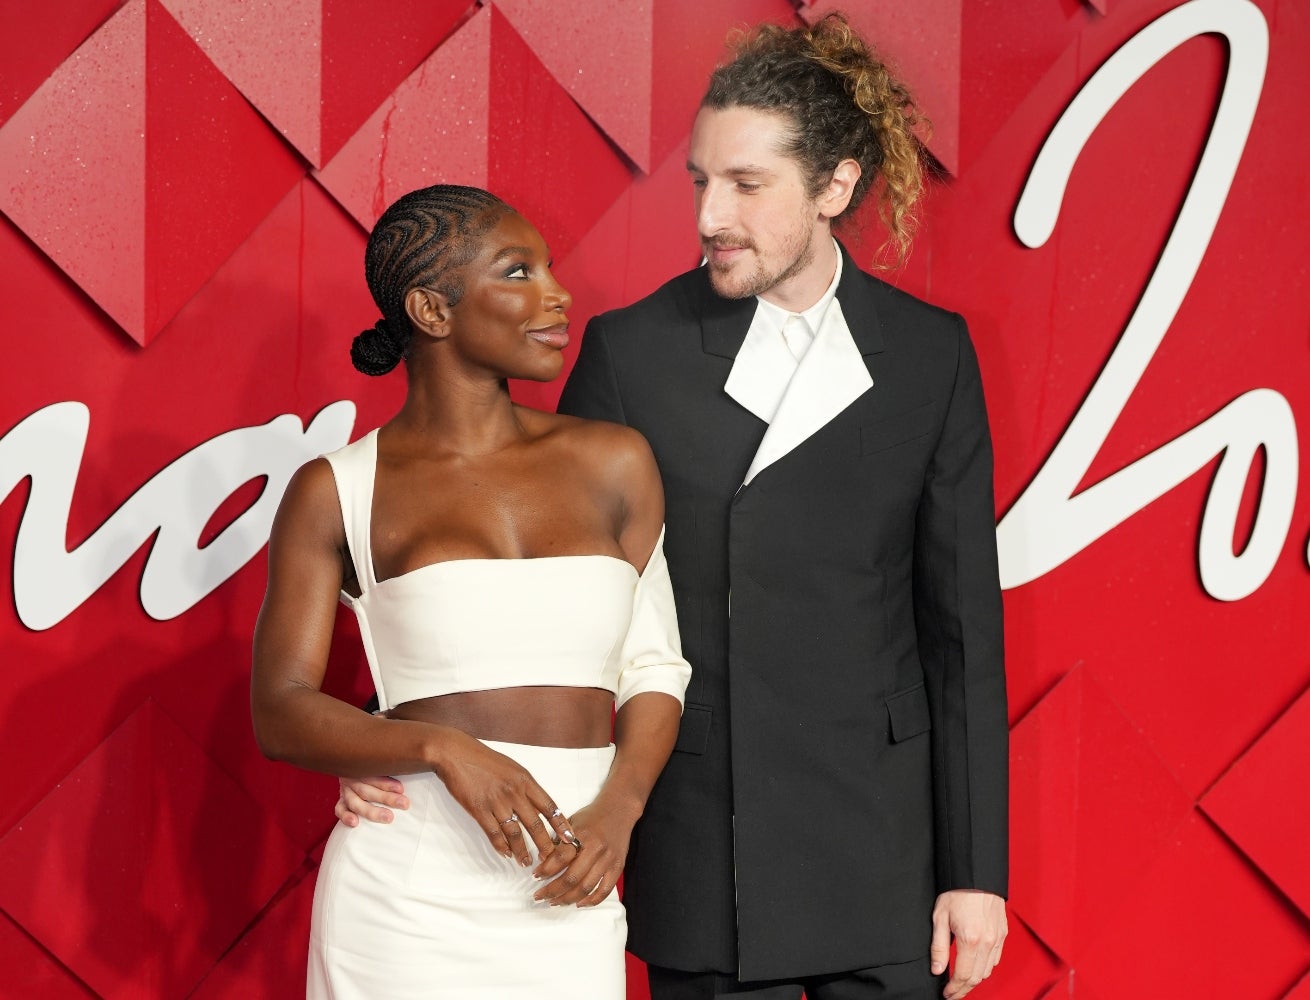 'Hard Launch': Michaela Coel And Her New Man Make Their Red Carpet Debut